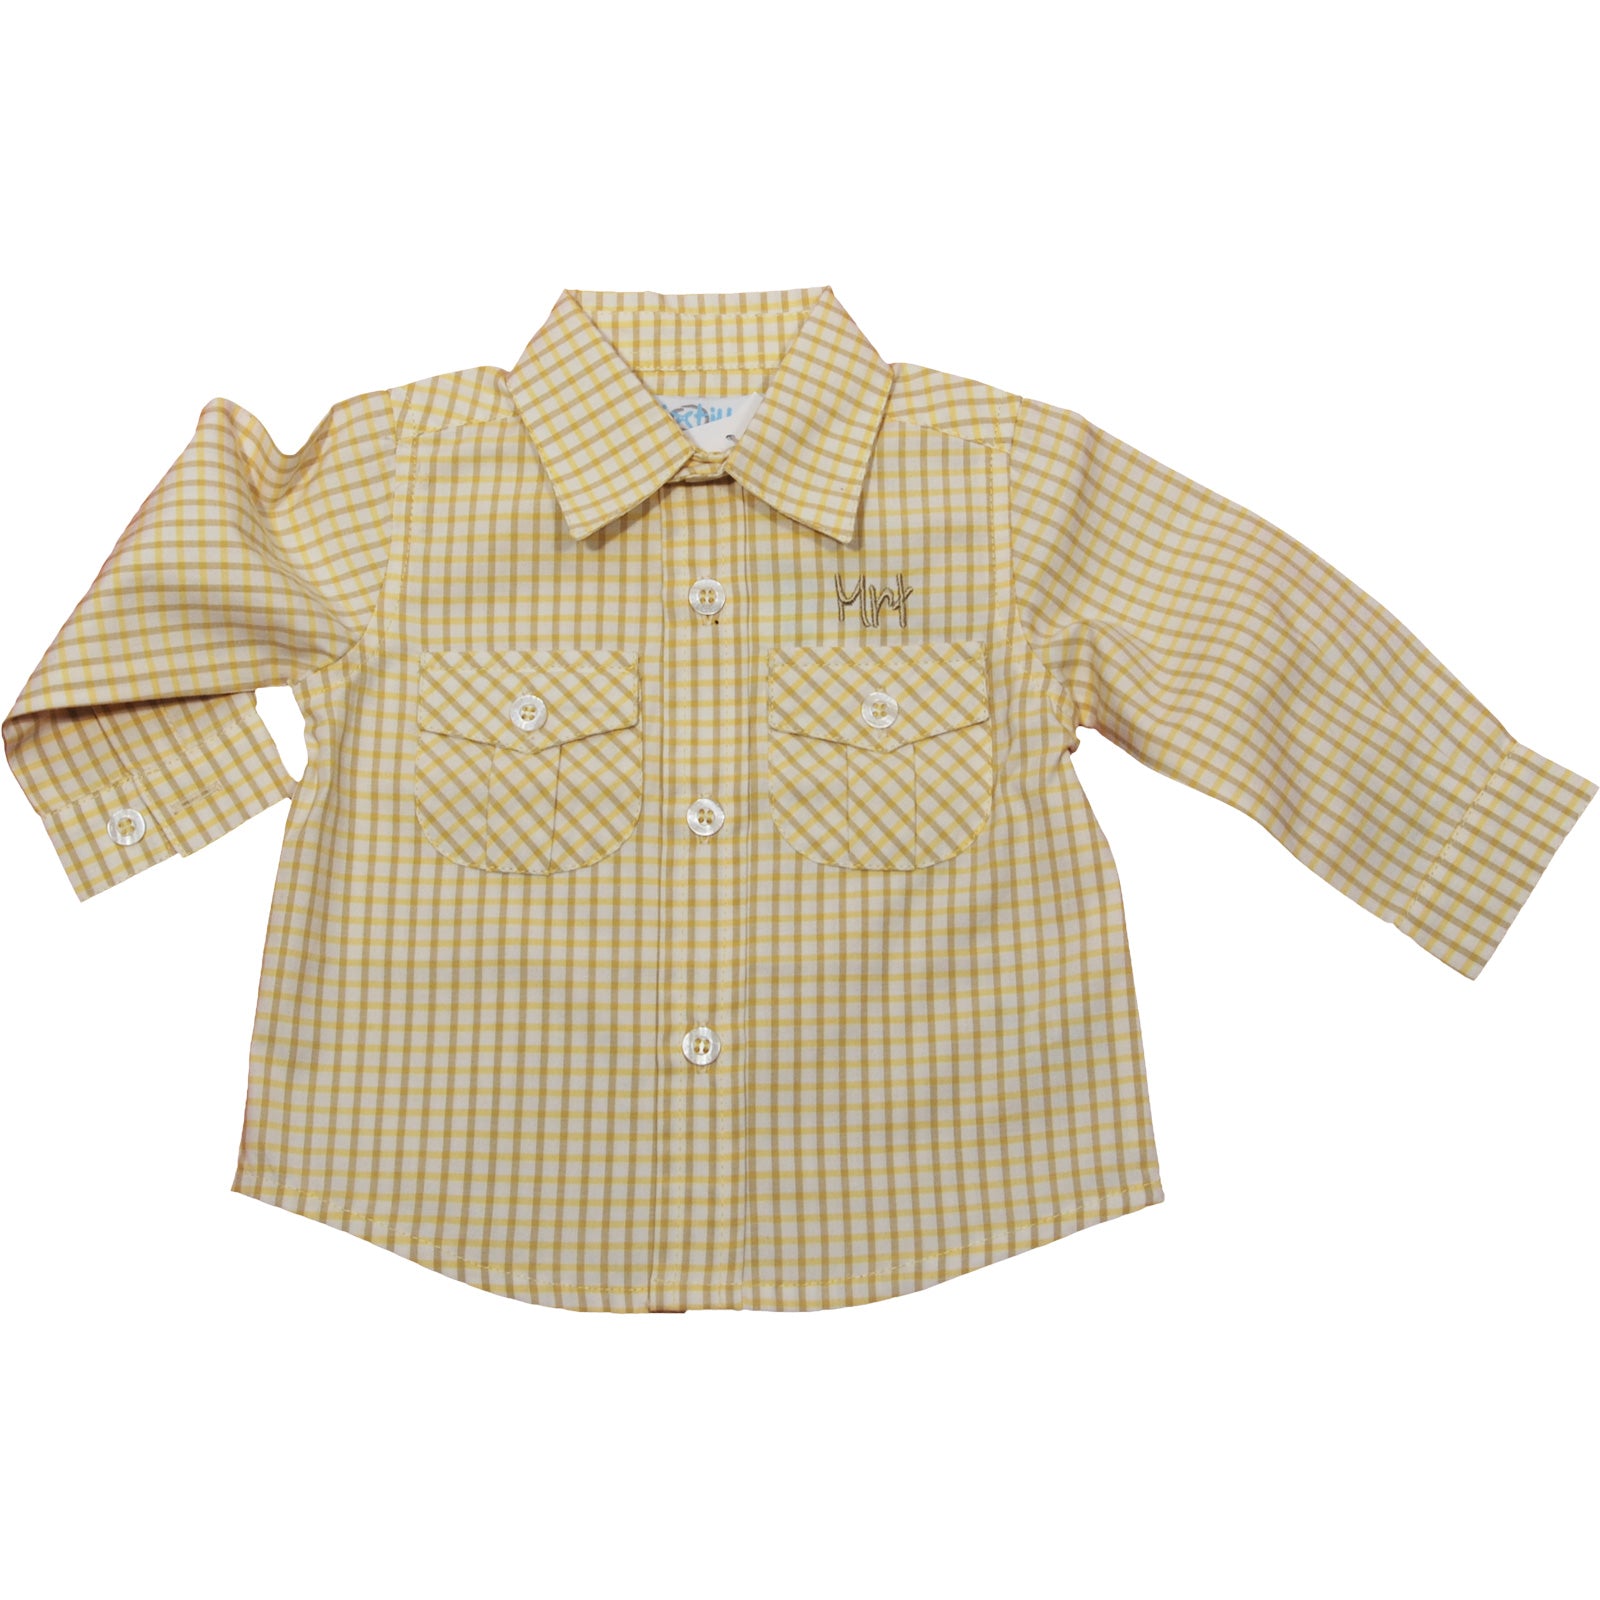 
  Checked shirt from the children's clothing line Blueberry, with pockets on the front and embro...